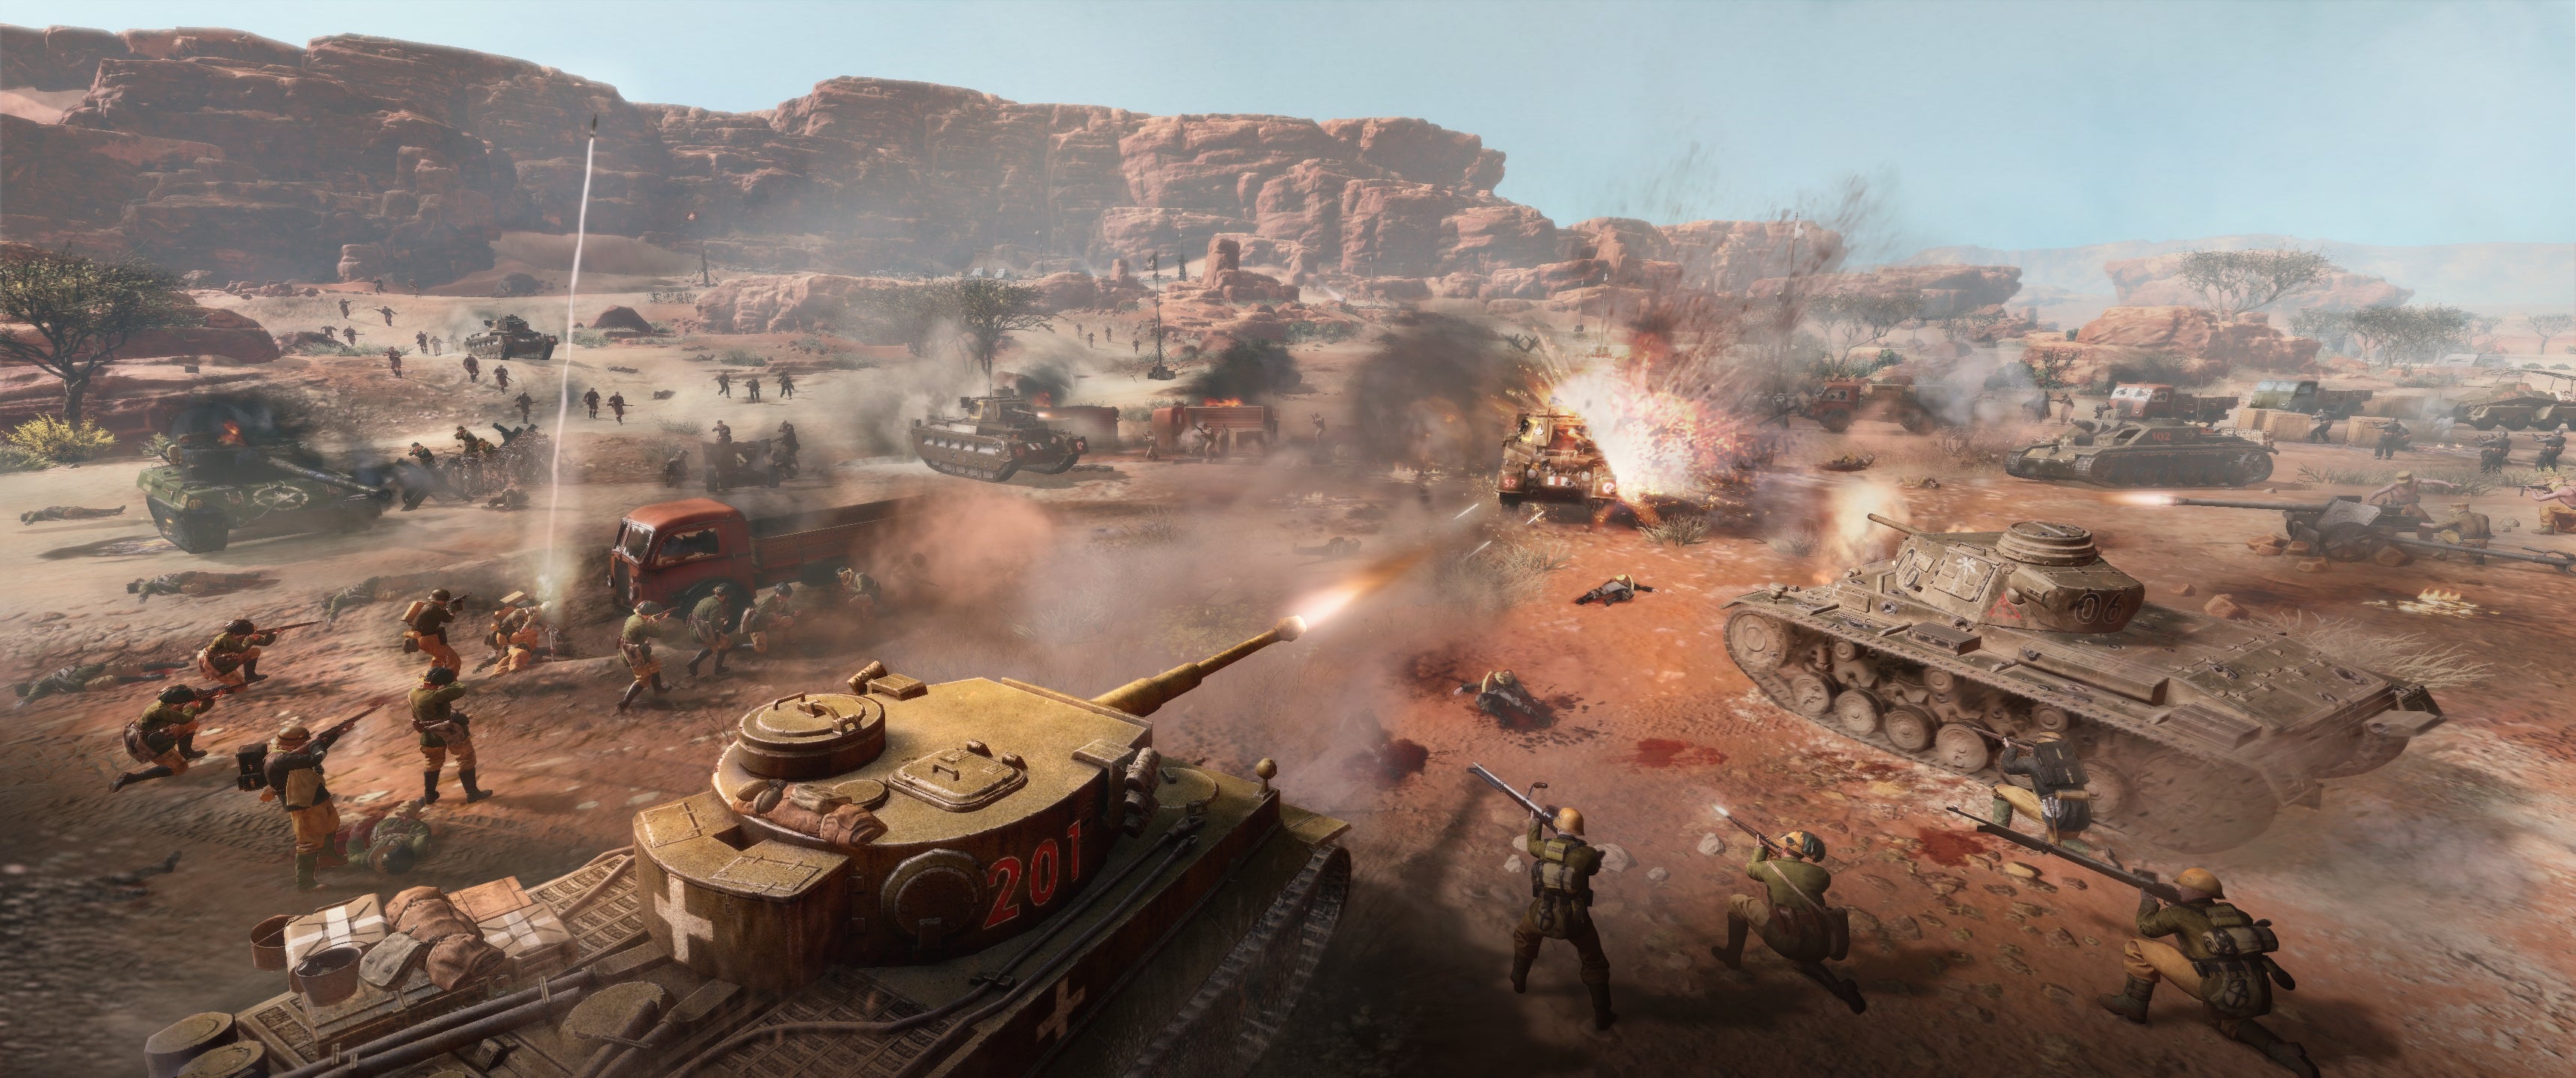 Company of Heroes 3 preview - an edited action plan of tank warfare and Campbell's convoy in the desert